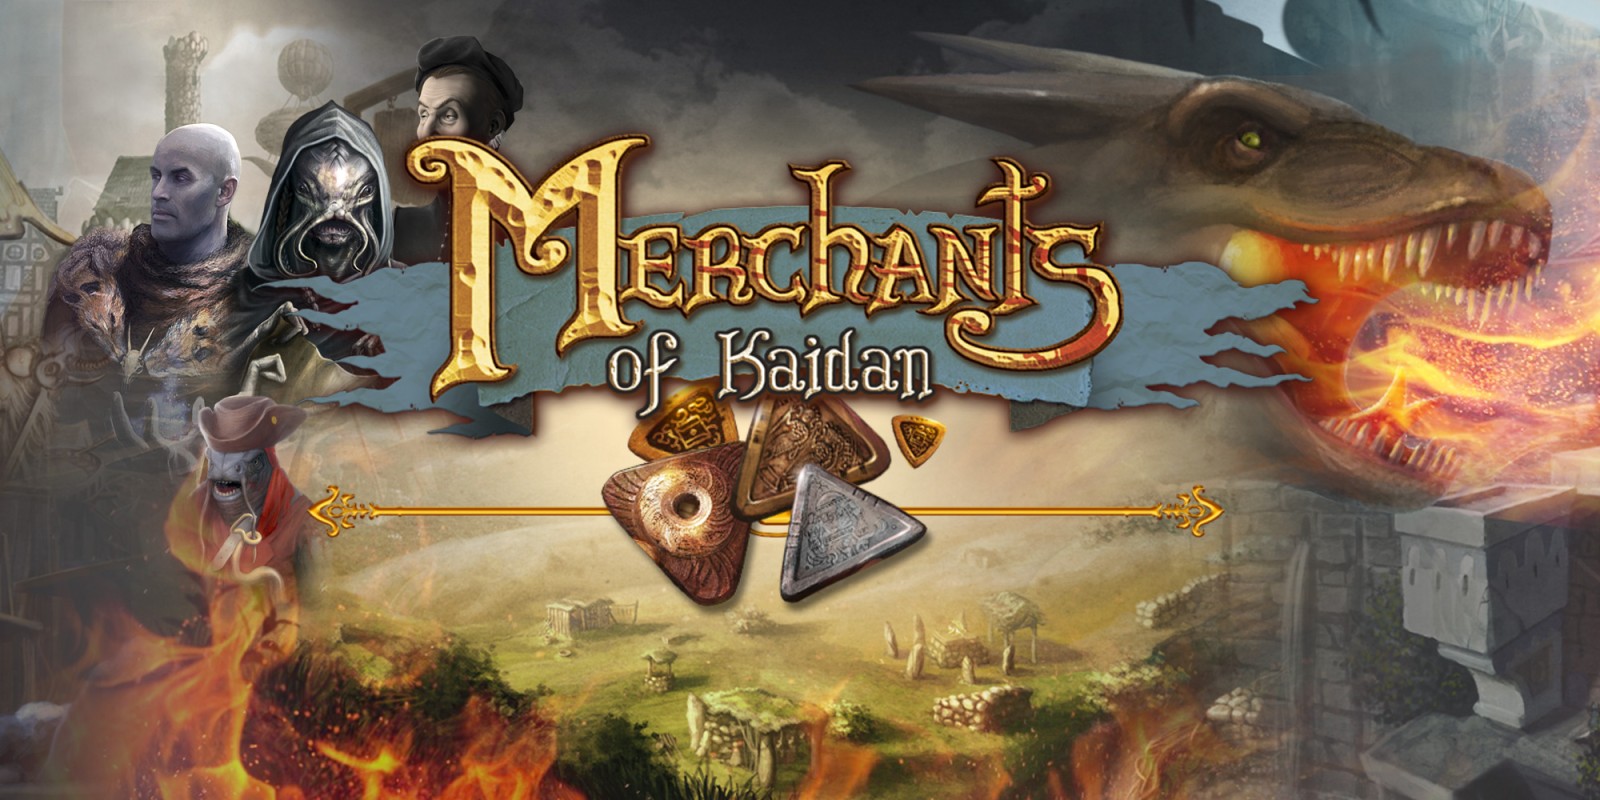 cant turn a profit in barbarian lands merchants of kaidan